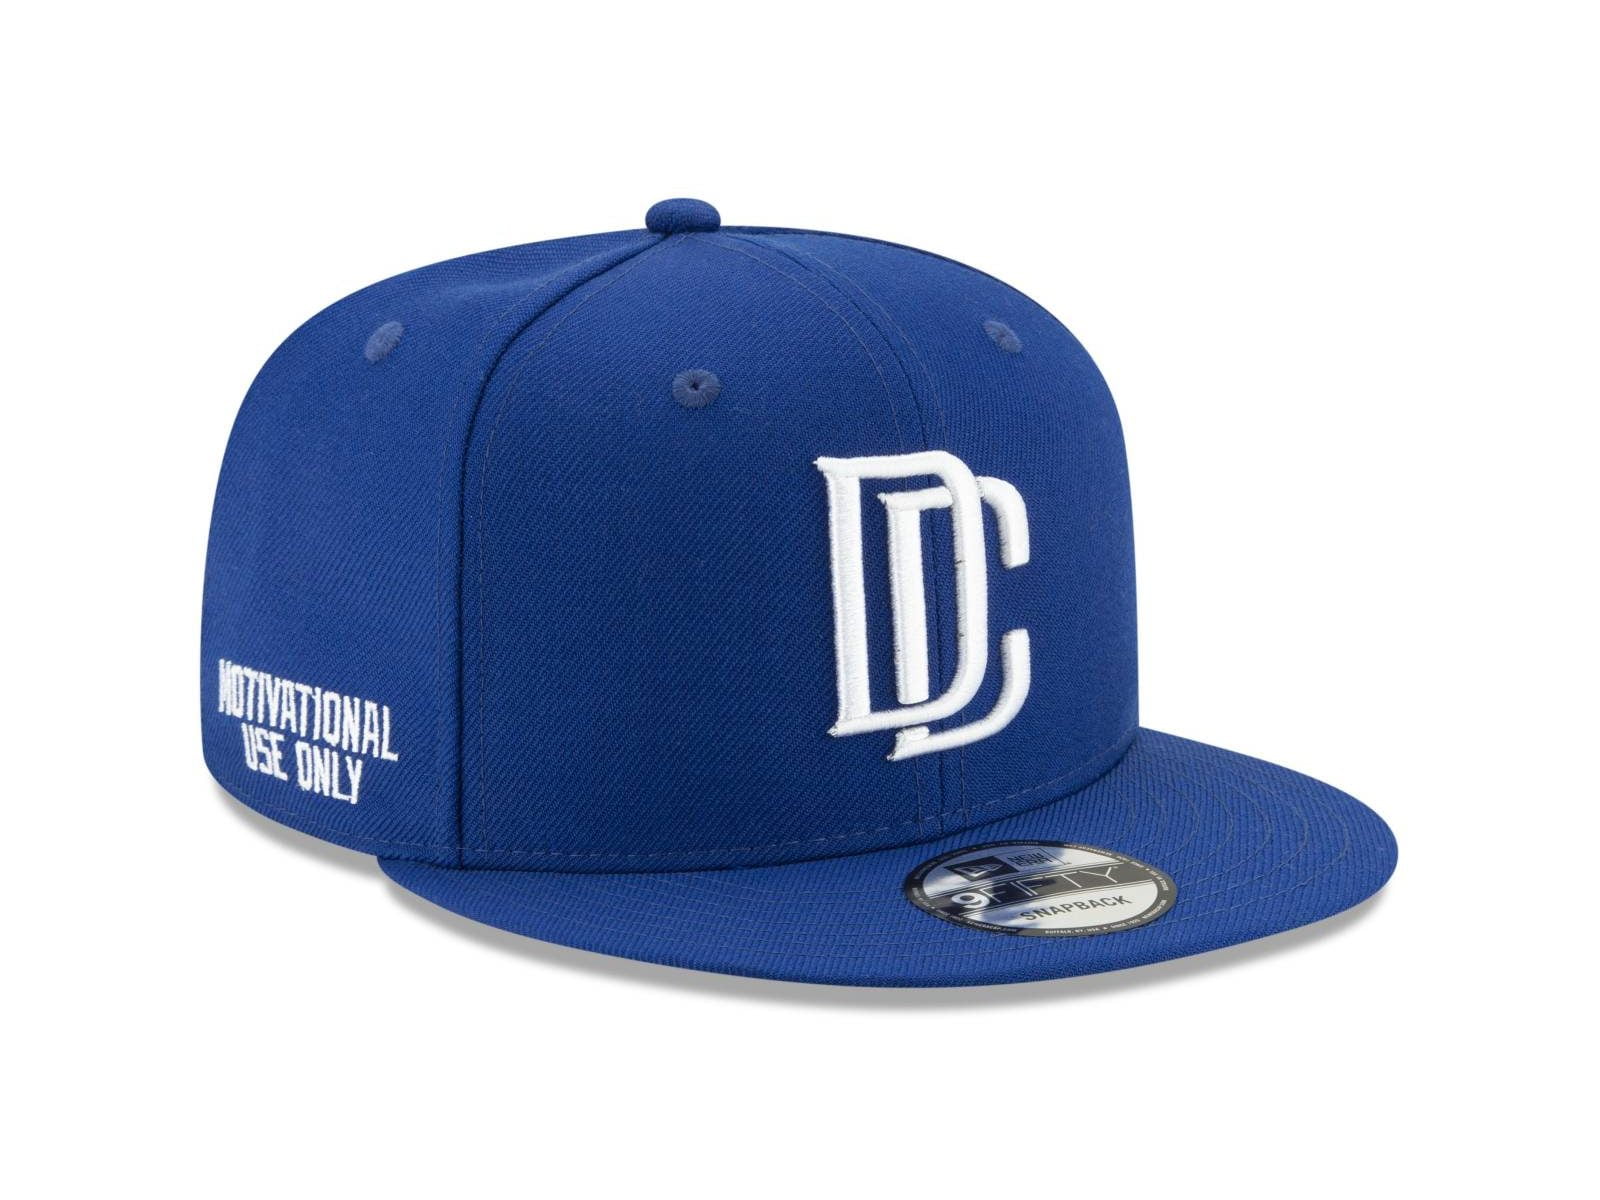 Meek Mill Dropping New Lids DC Hat In Royal Blue Colorway - Urban